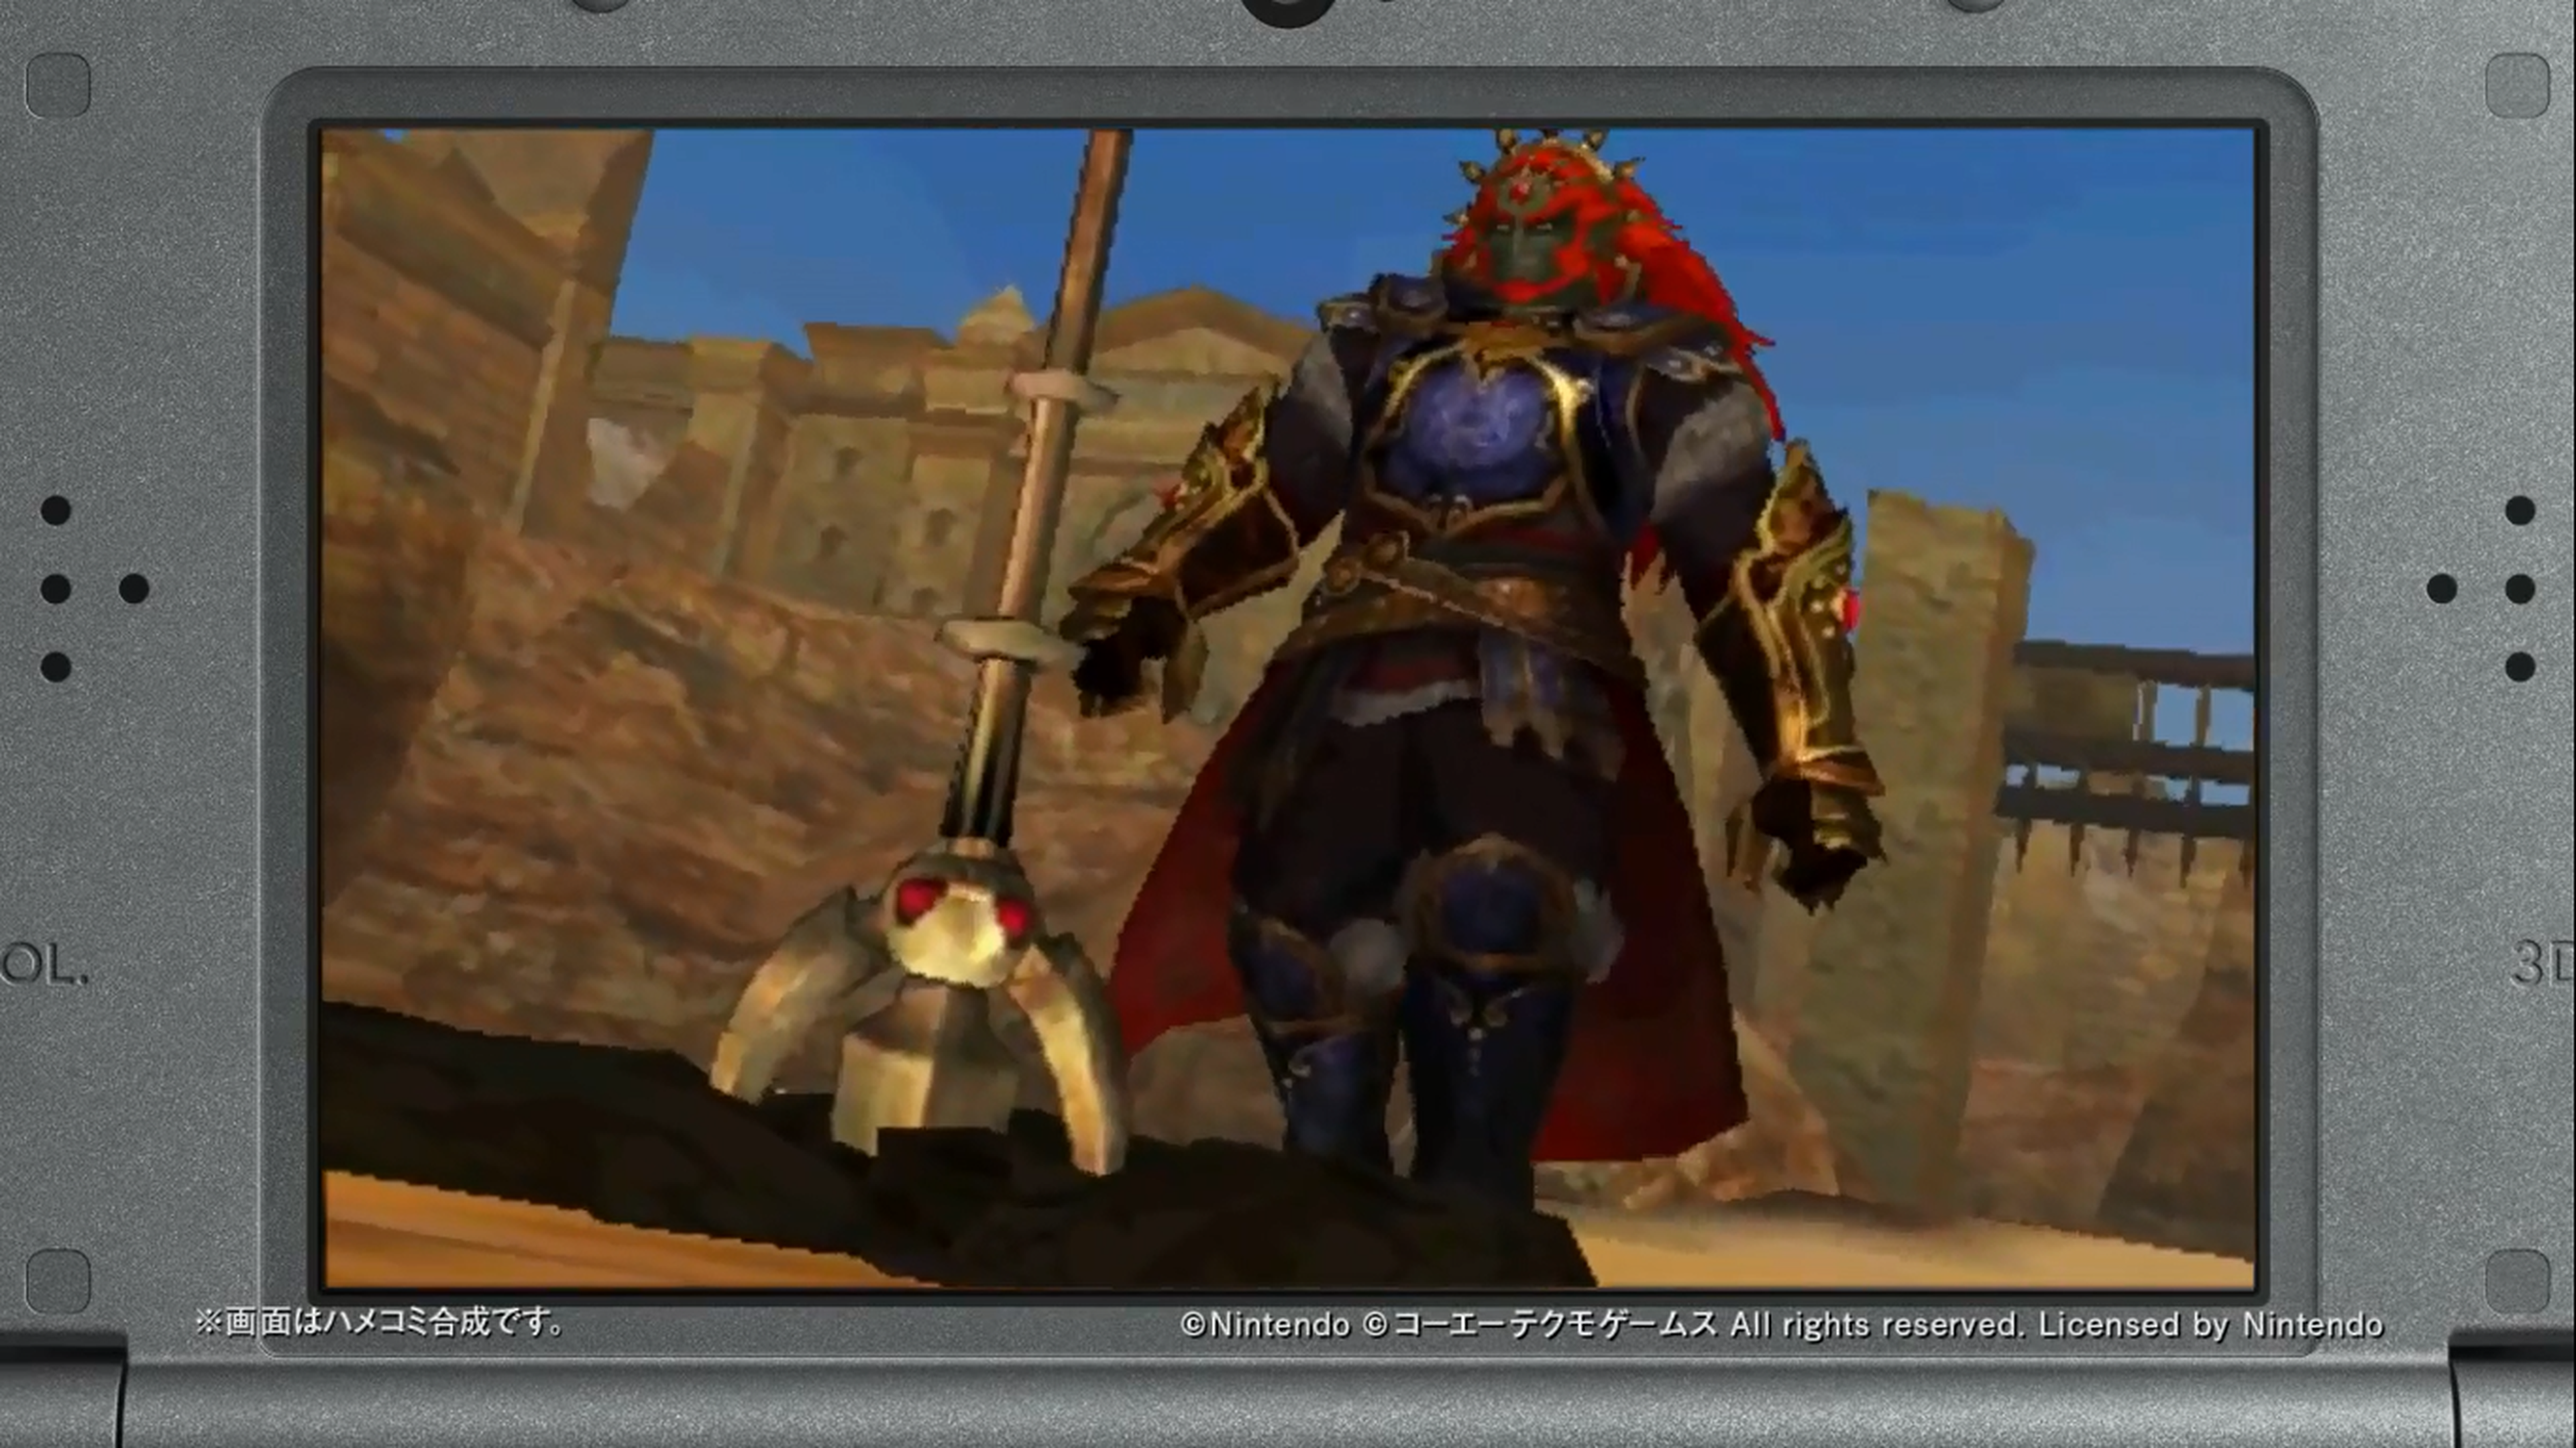 Hyrule Warriors Legends Character Trailer ~ Ganondorf with Trident